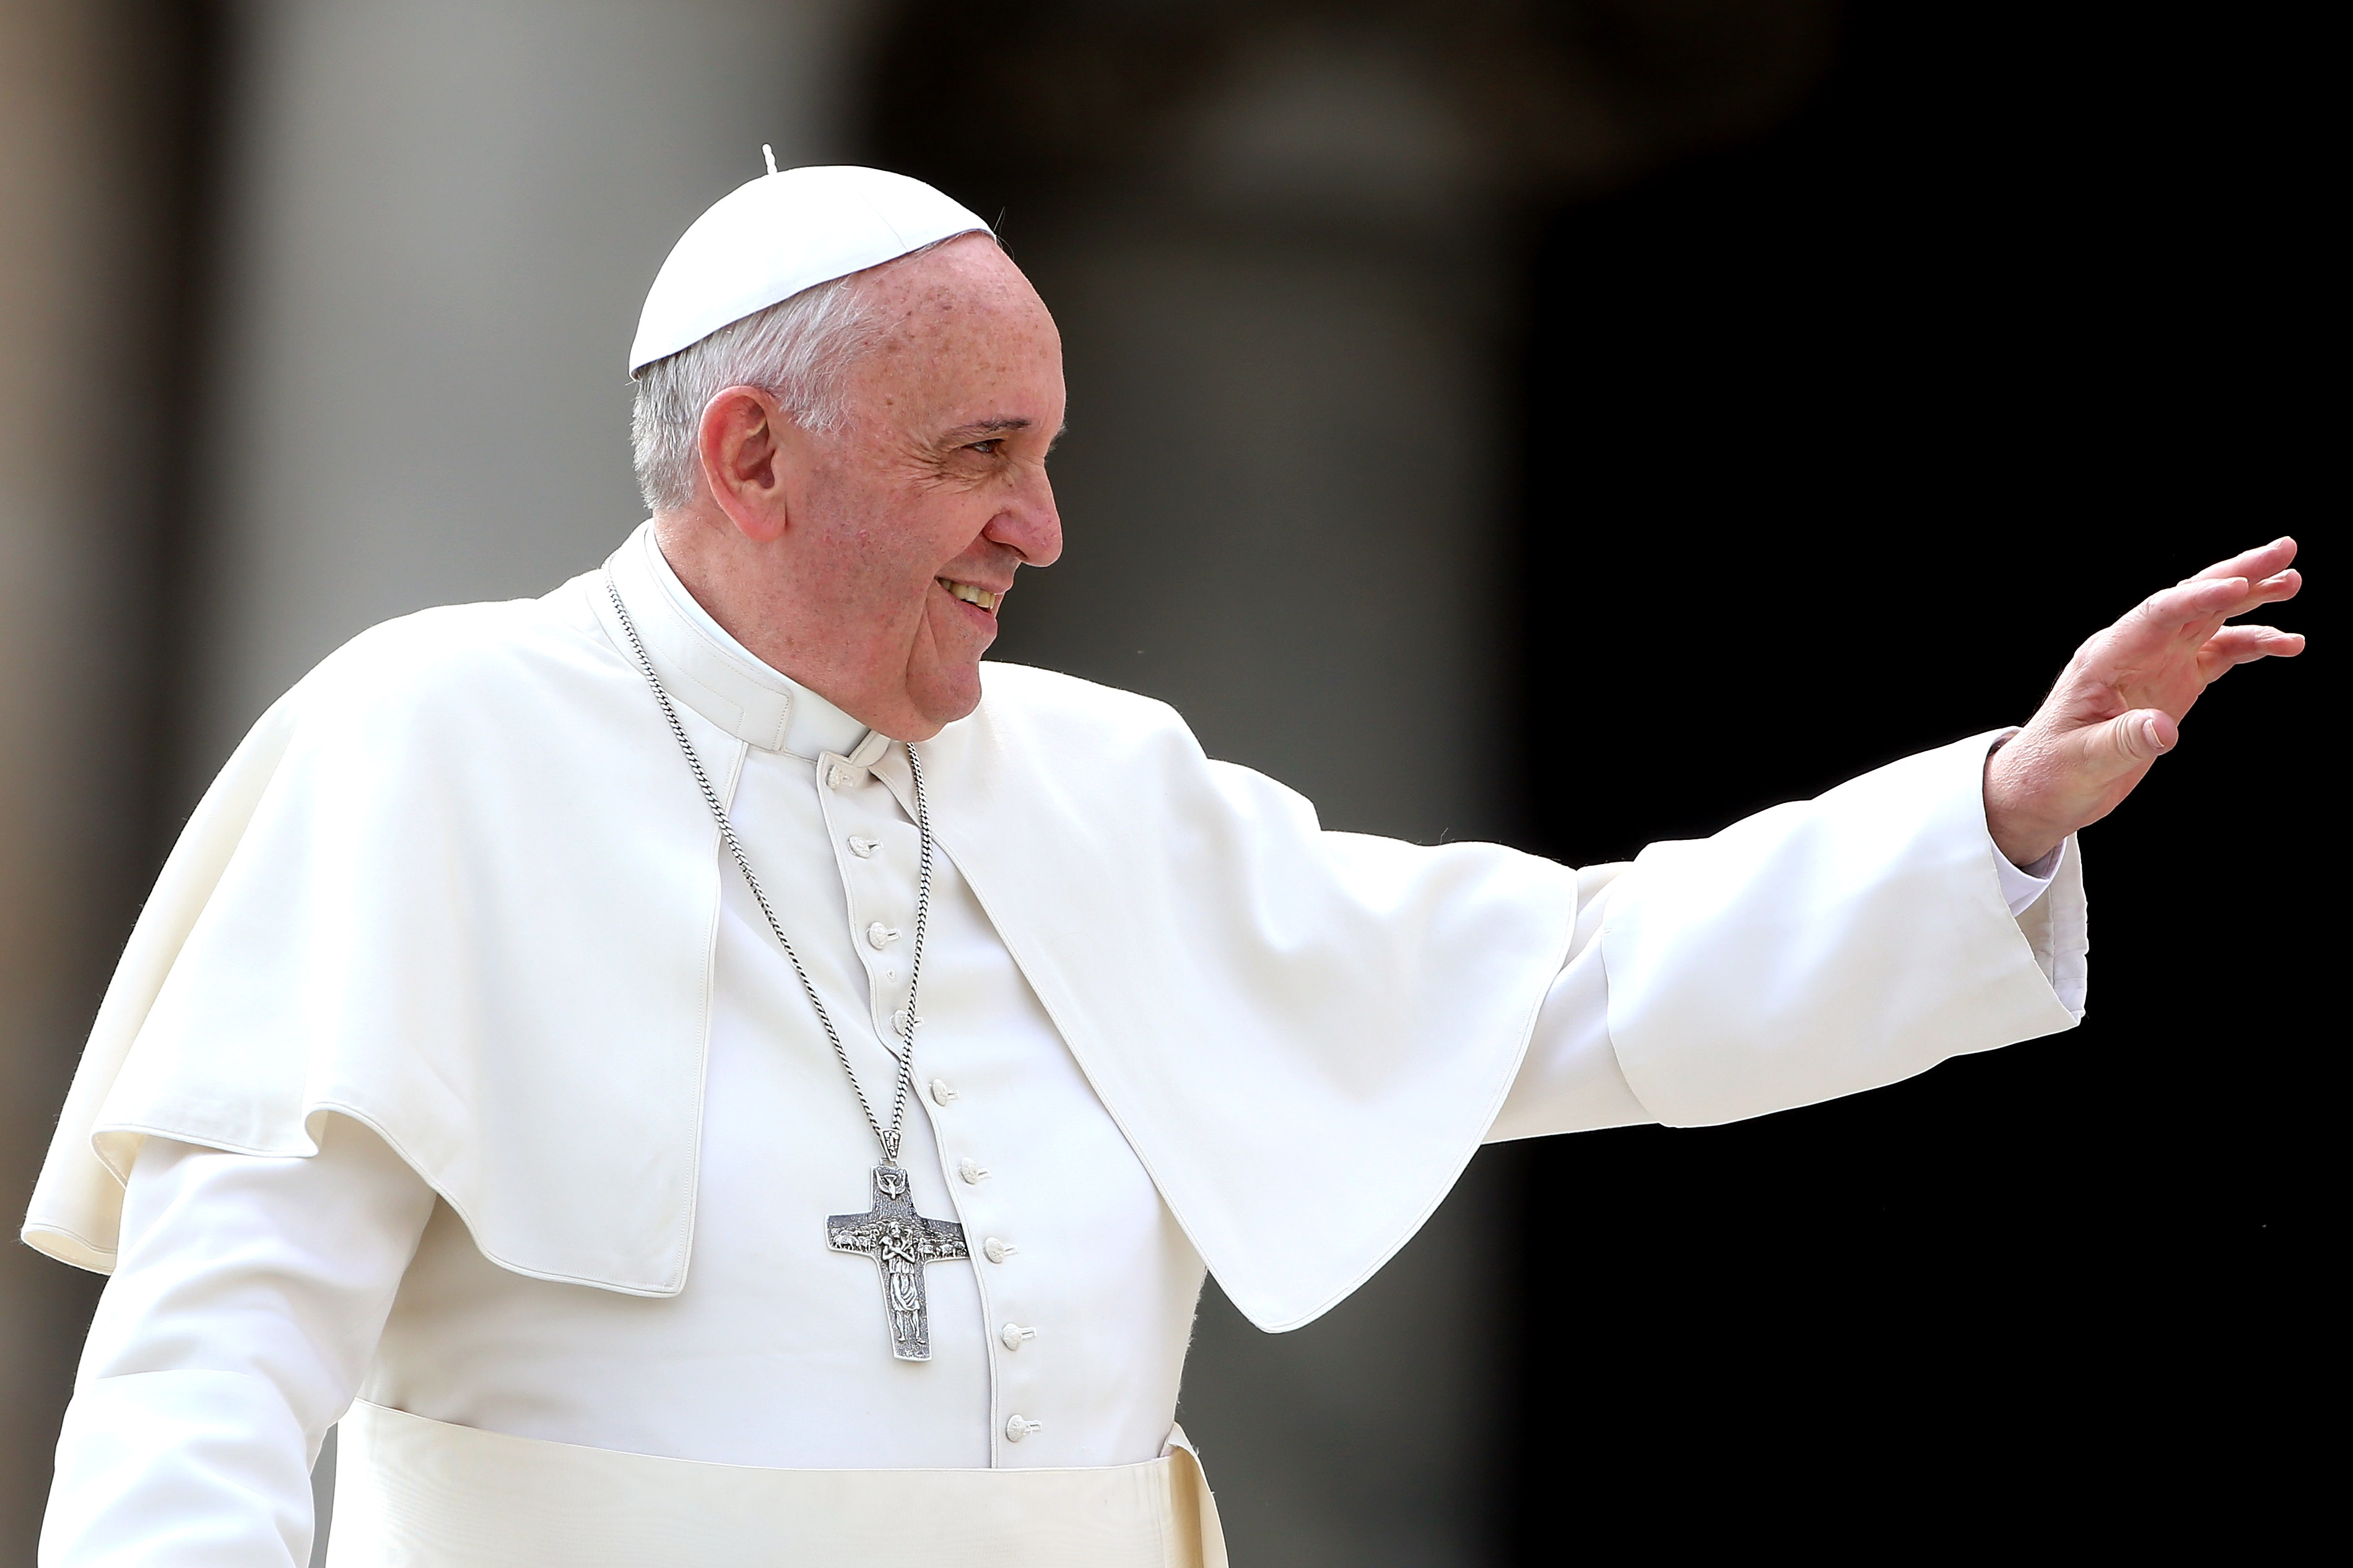 Pope Francis waves to the faithful as he holds his weekly audience in St. Peter's Square on March 19, 2014 in Vatican City, Vatican. (Franco Origlia—Getty Images)